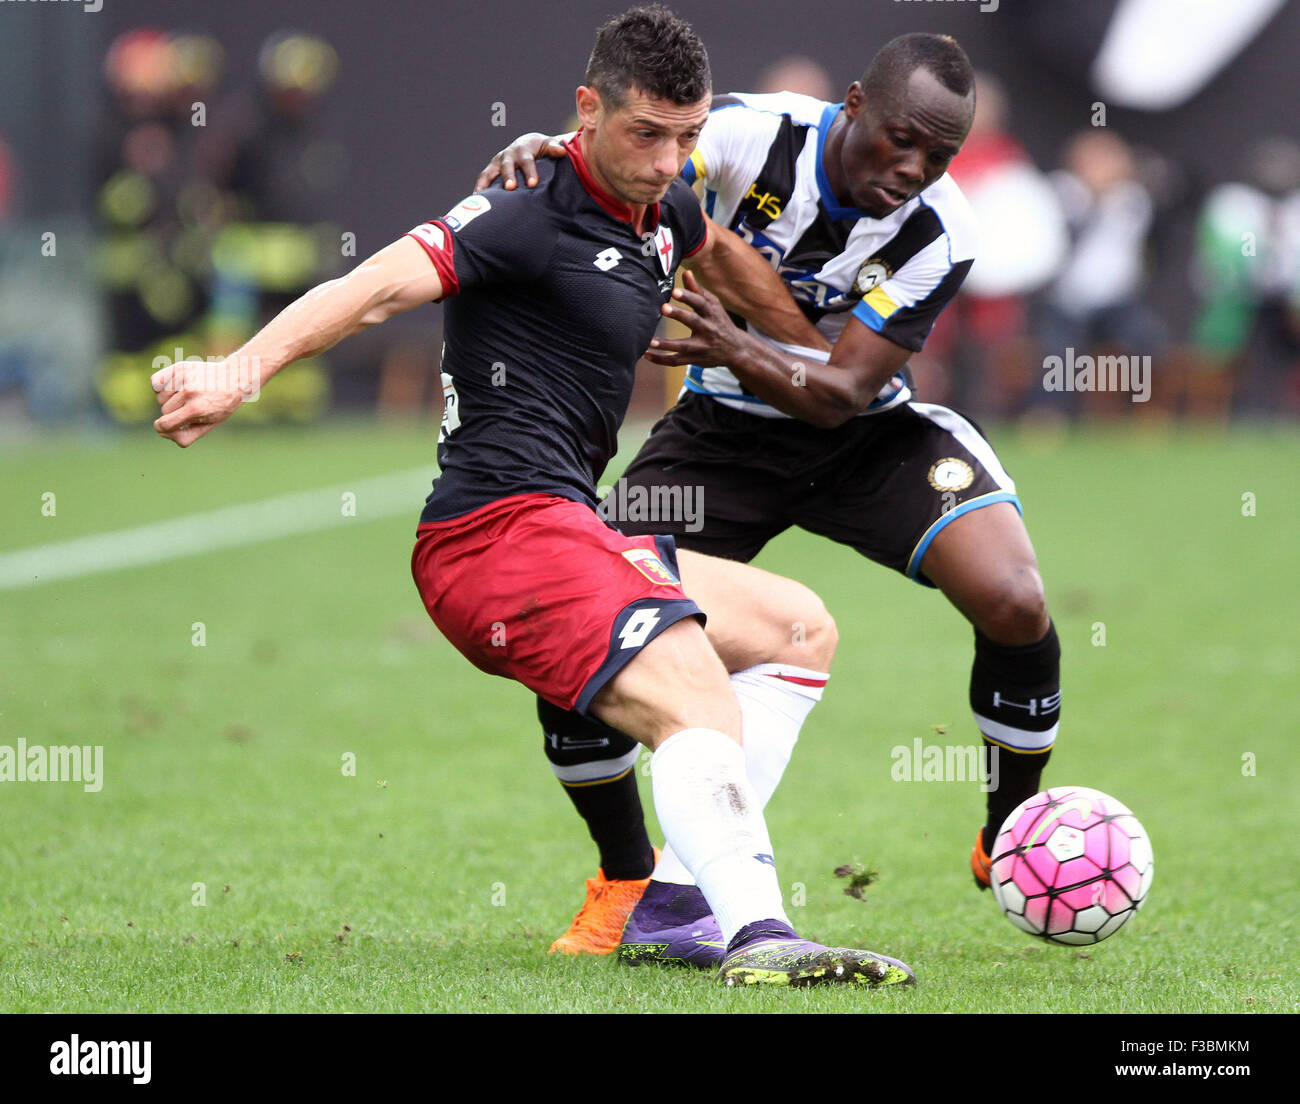 Udine, Italy. 4th October, 2015. Udinese's midfielder Emmanuel Agyemang Badu (R) vies with Genoa's midfielder Blerim Dzemaili during the Italian Serie A football match between Udinese Calcio v Genoa Cfc at Friuli Stadium on 4 October, 2015 at Udine. Credit:  Andrea Spinelli/Alamy Live News Stock Photo